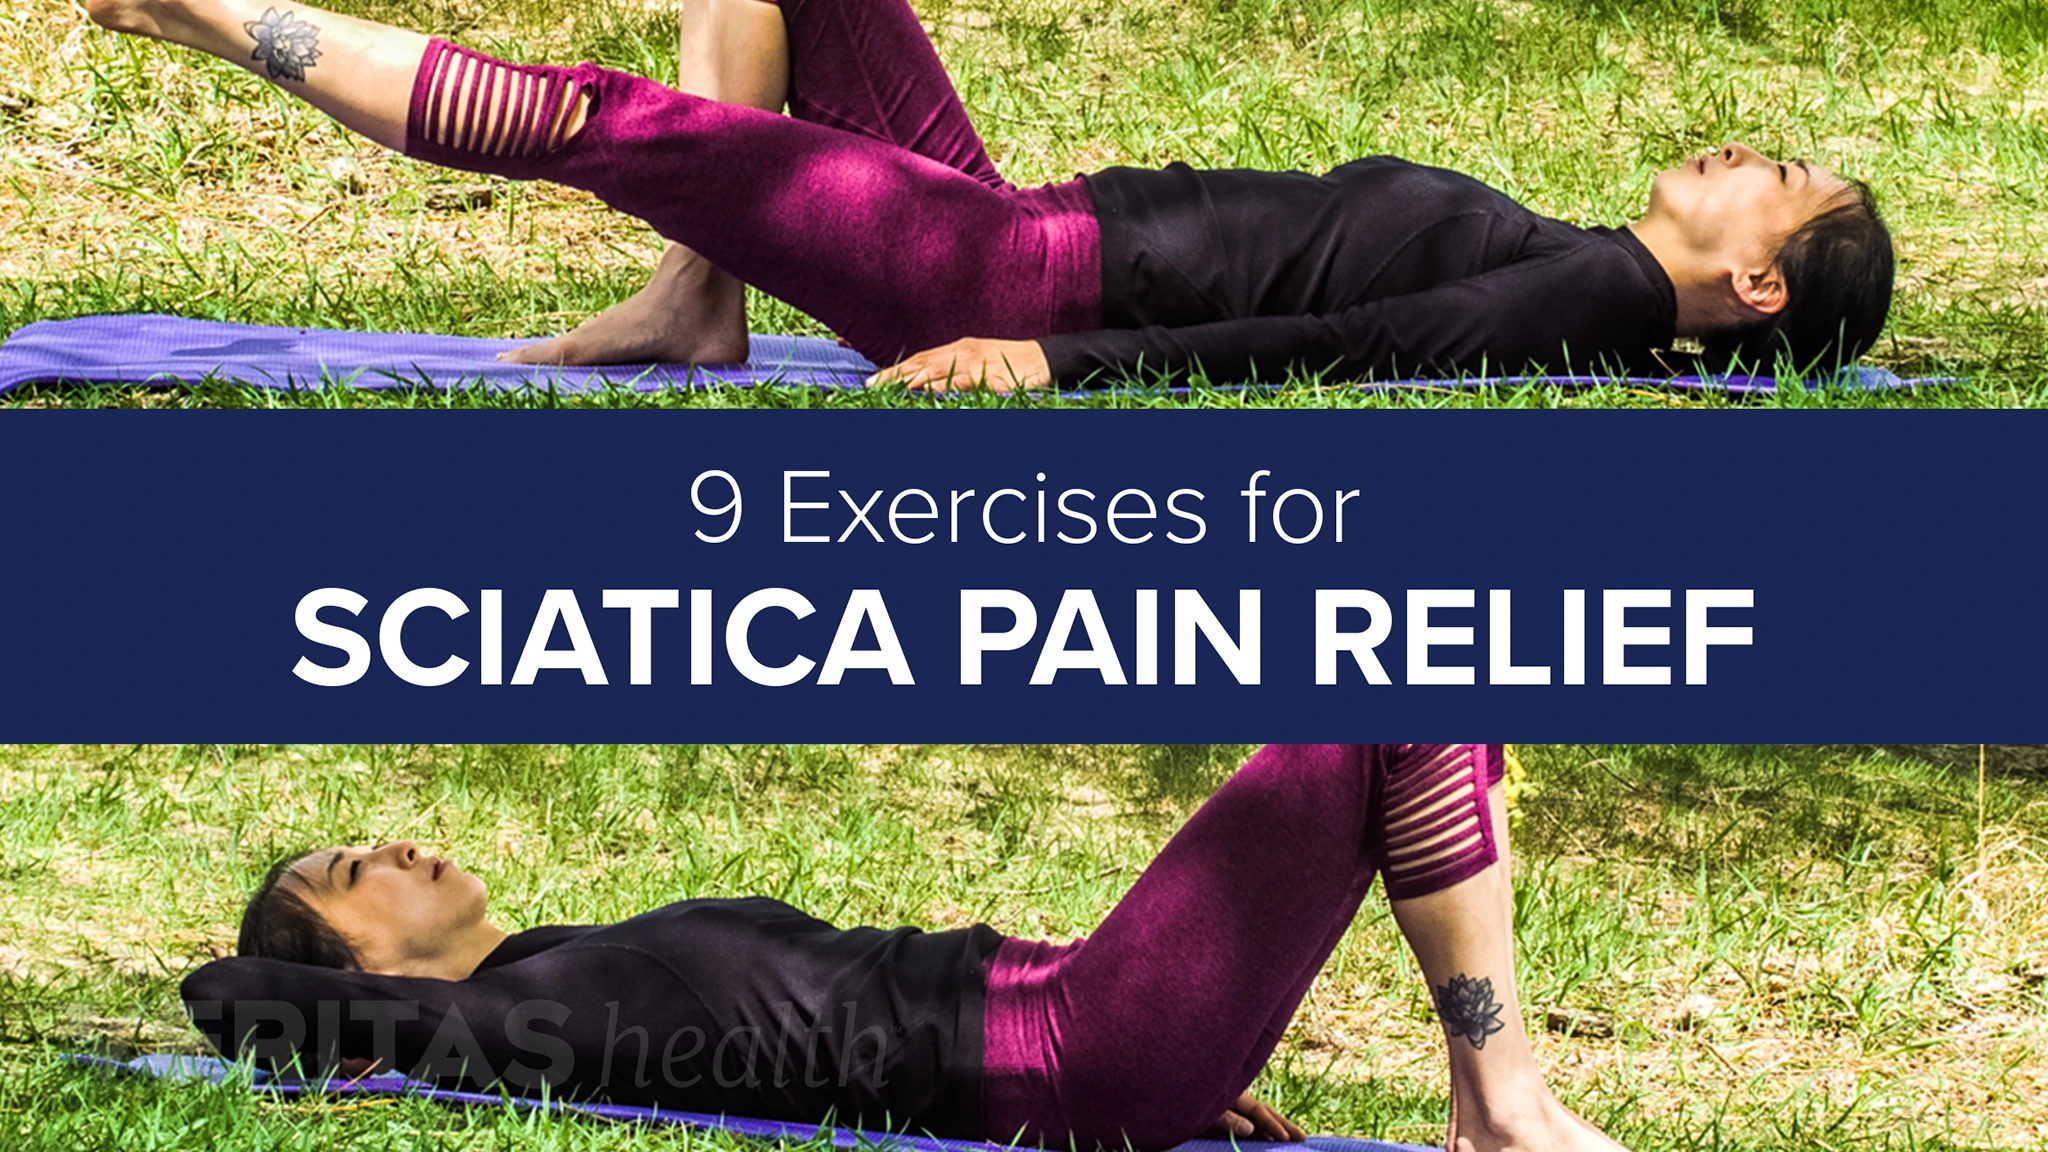 7 Sciatica Stretches and Exercises to Help Relieve the Discomfort | SELF